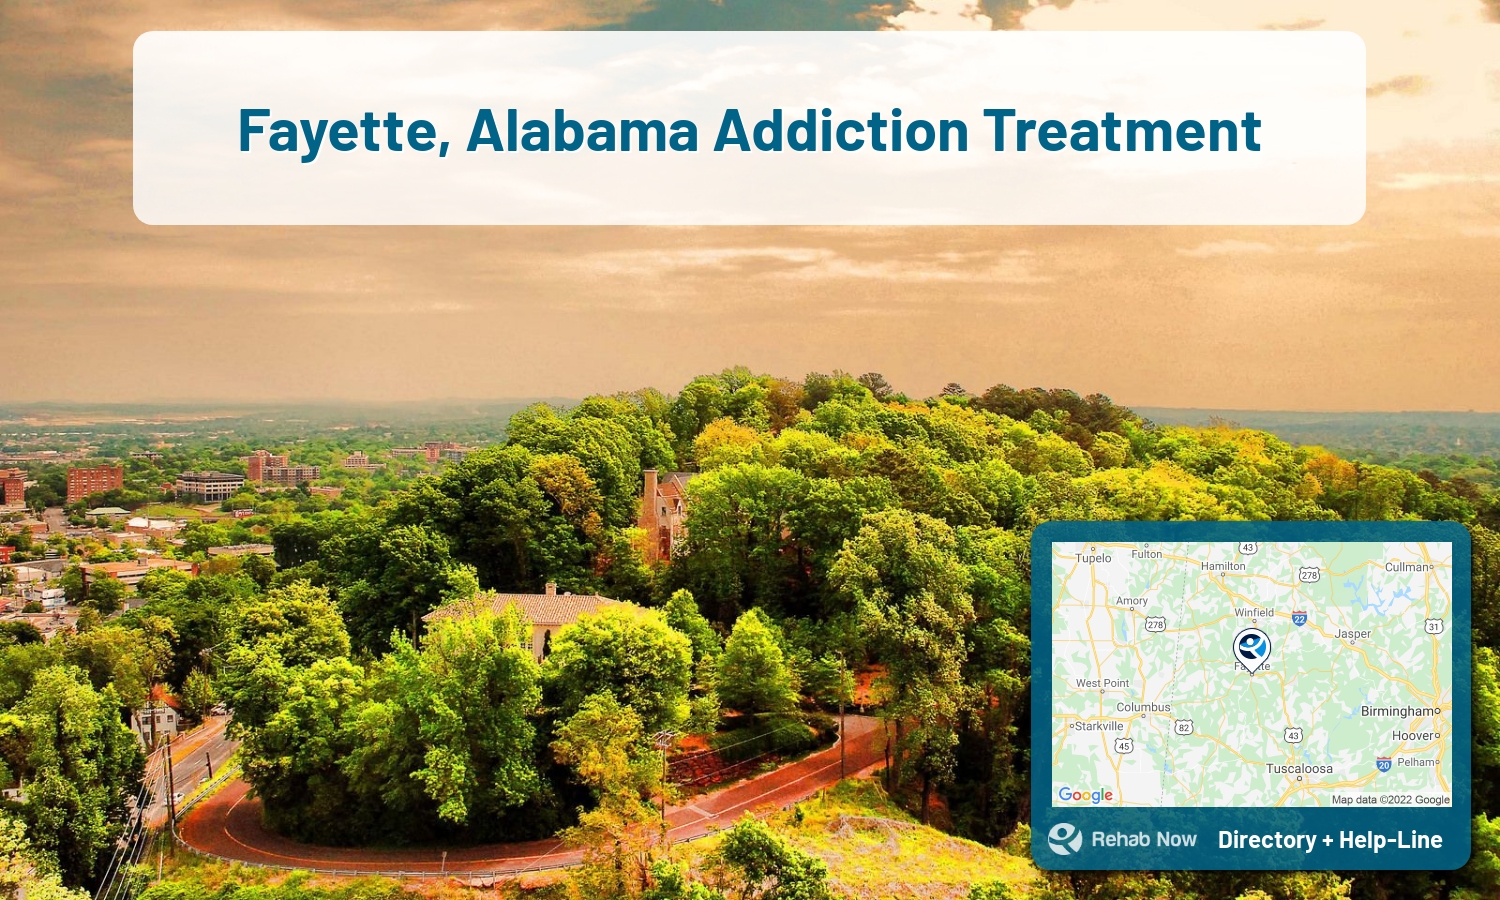 Let our expert counselors help find the best addiction treatment in Fayette, Alabama now with a free call to our hotline.